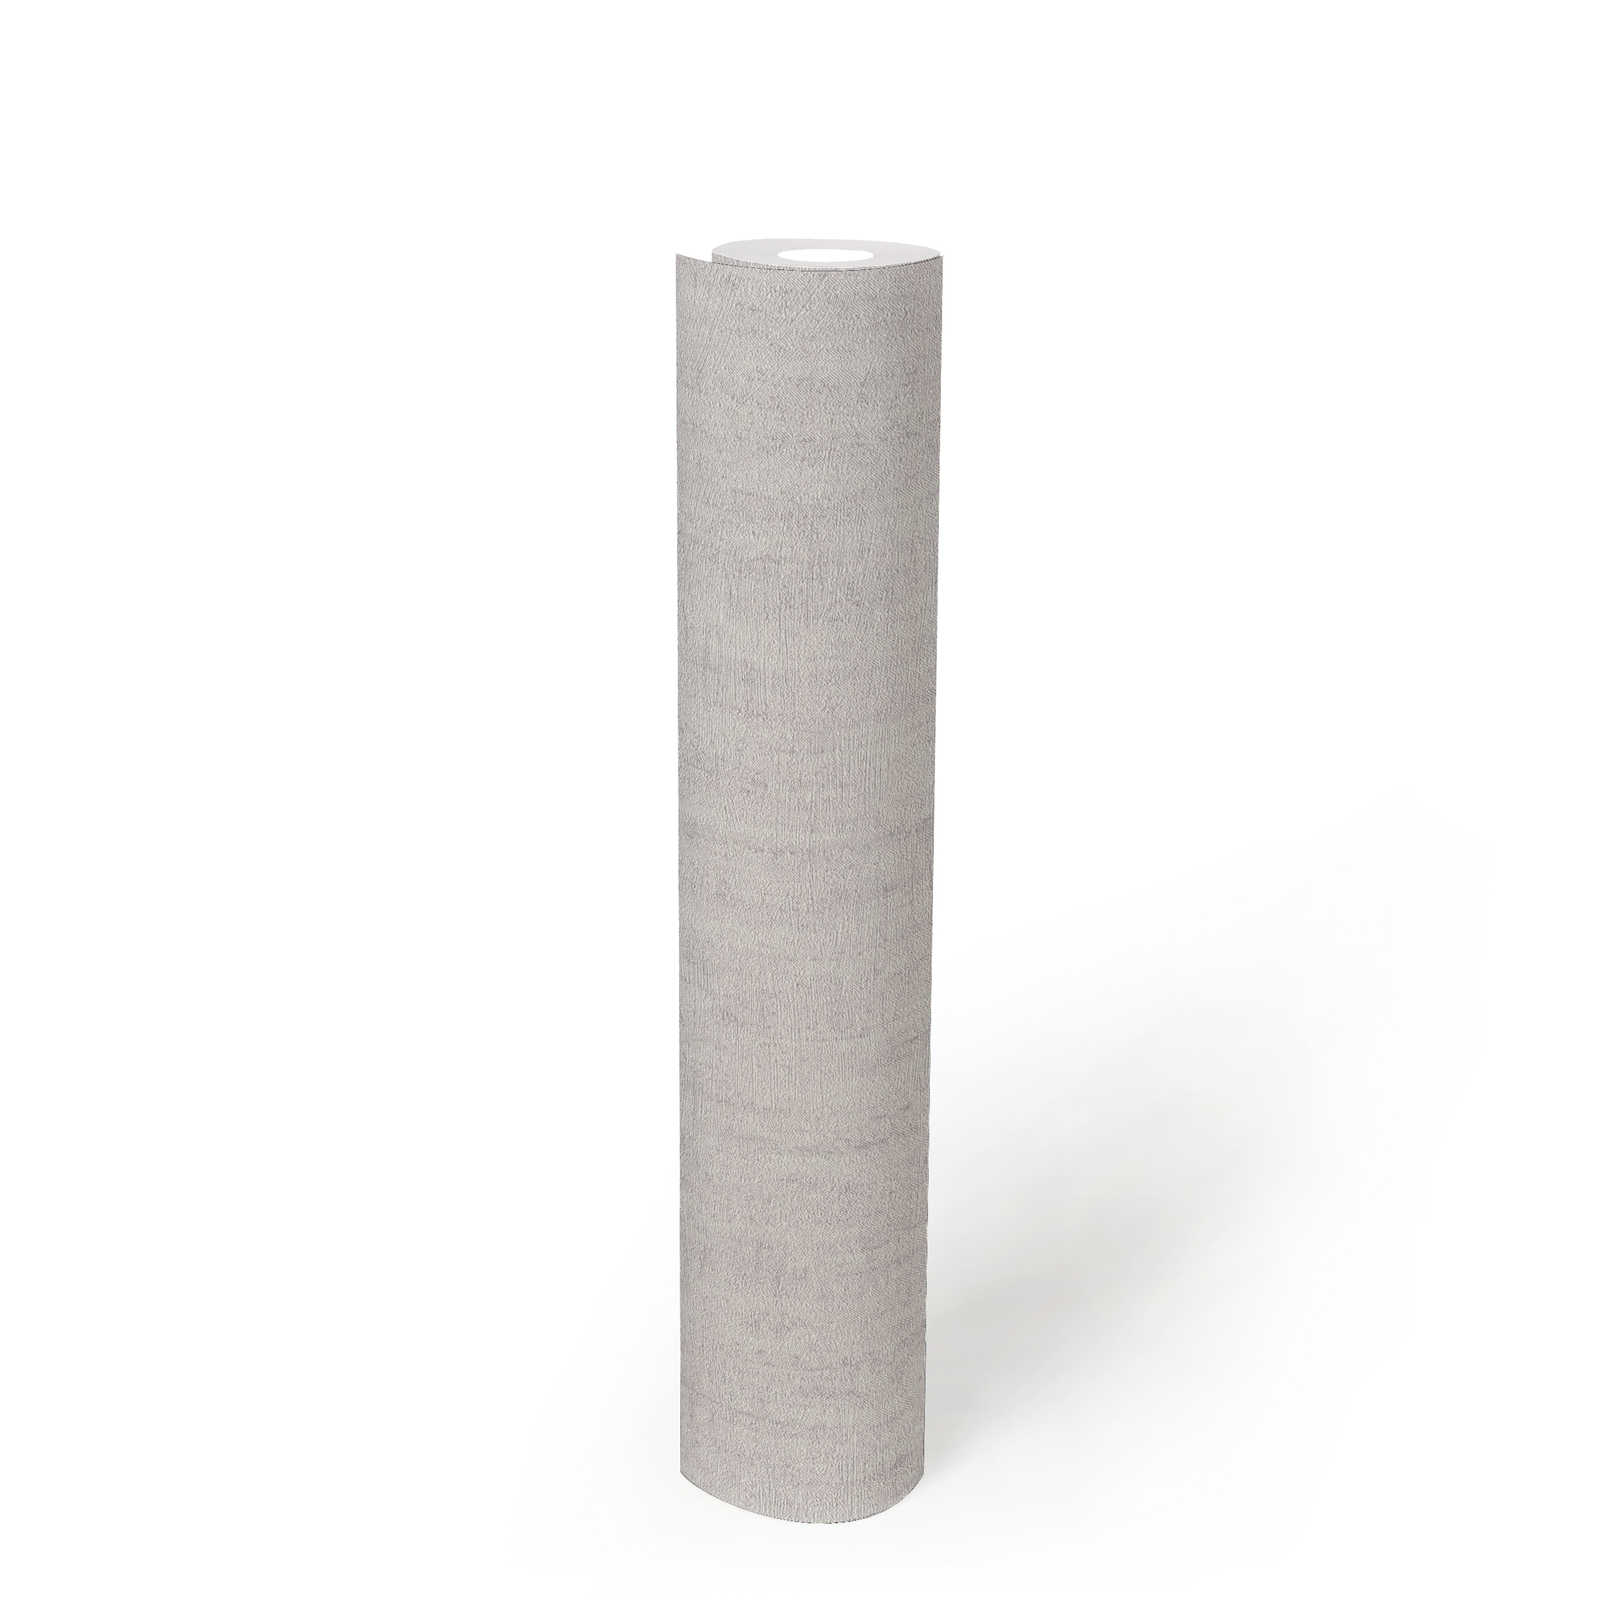             Light grey non-woven wallpaper glossy with textured pattern - grey
        